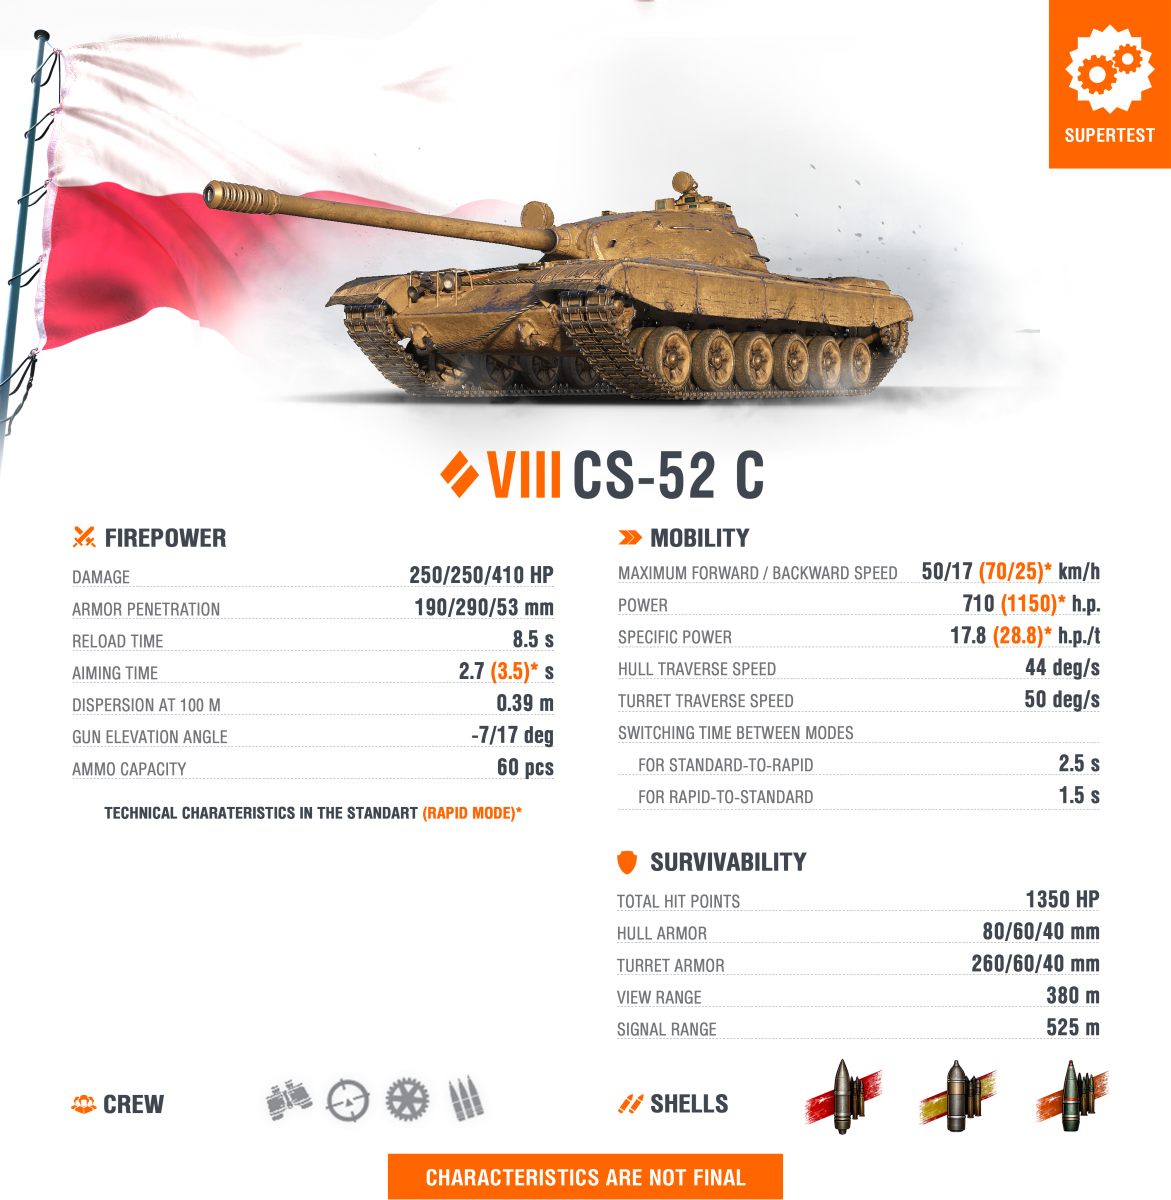 WoT: The CS-52 C Goes to the Supertest - The Armored Patrol